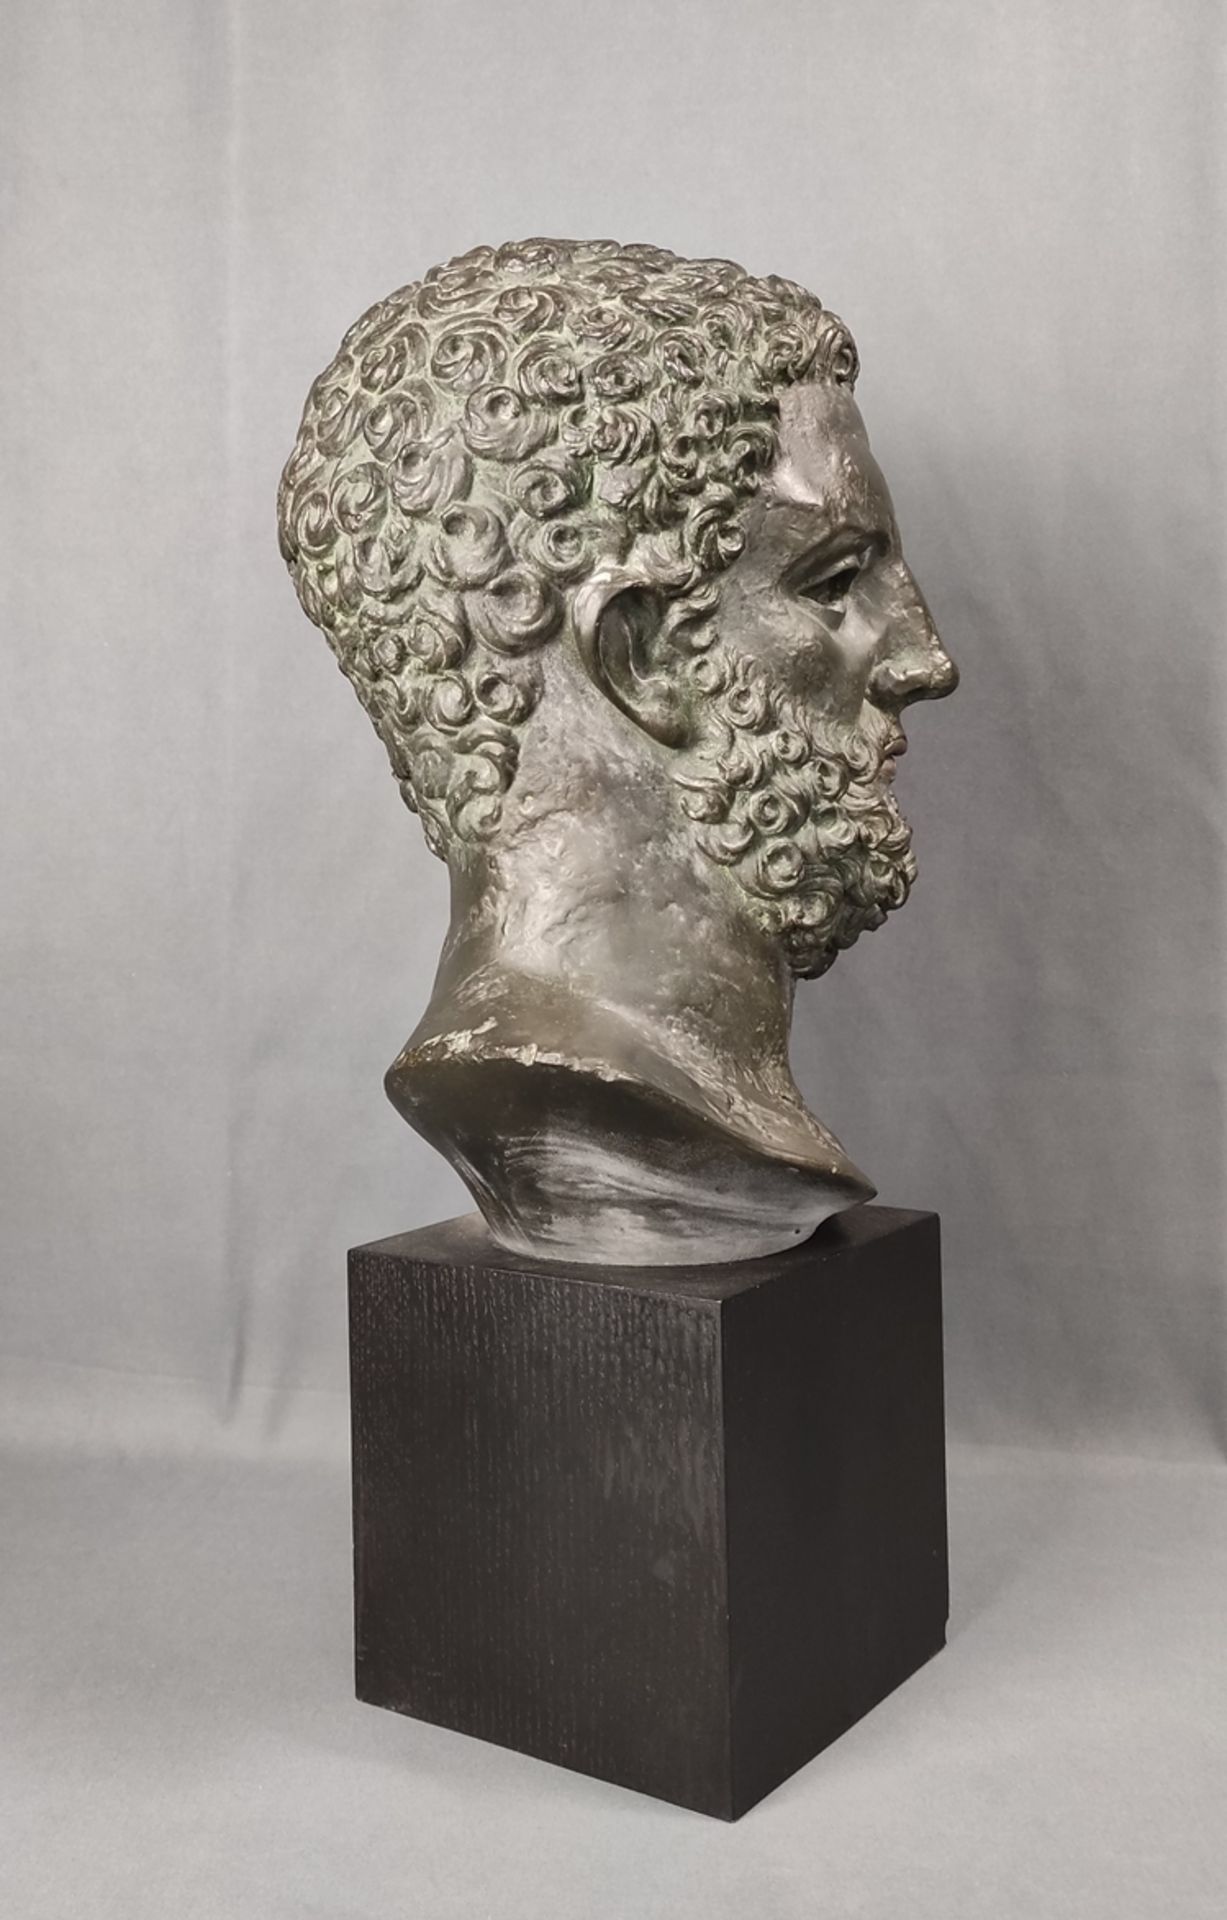 Hercules head, art casting from the Louvre, H 32 cm, with black wooden base height 51cm - Image 2 of 5